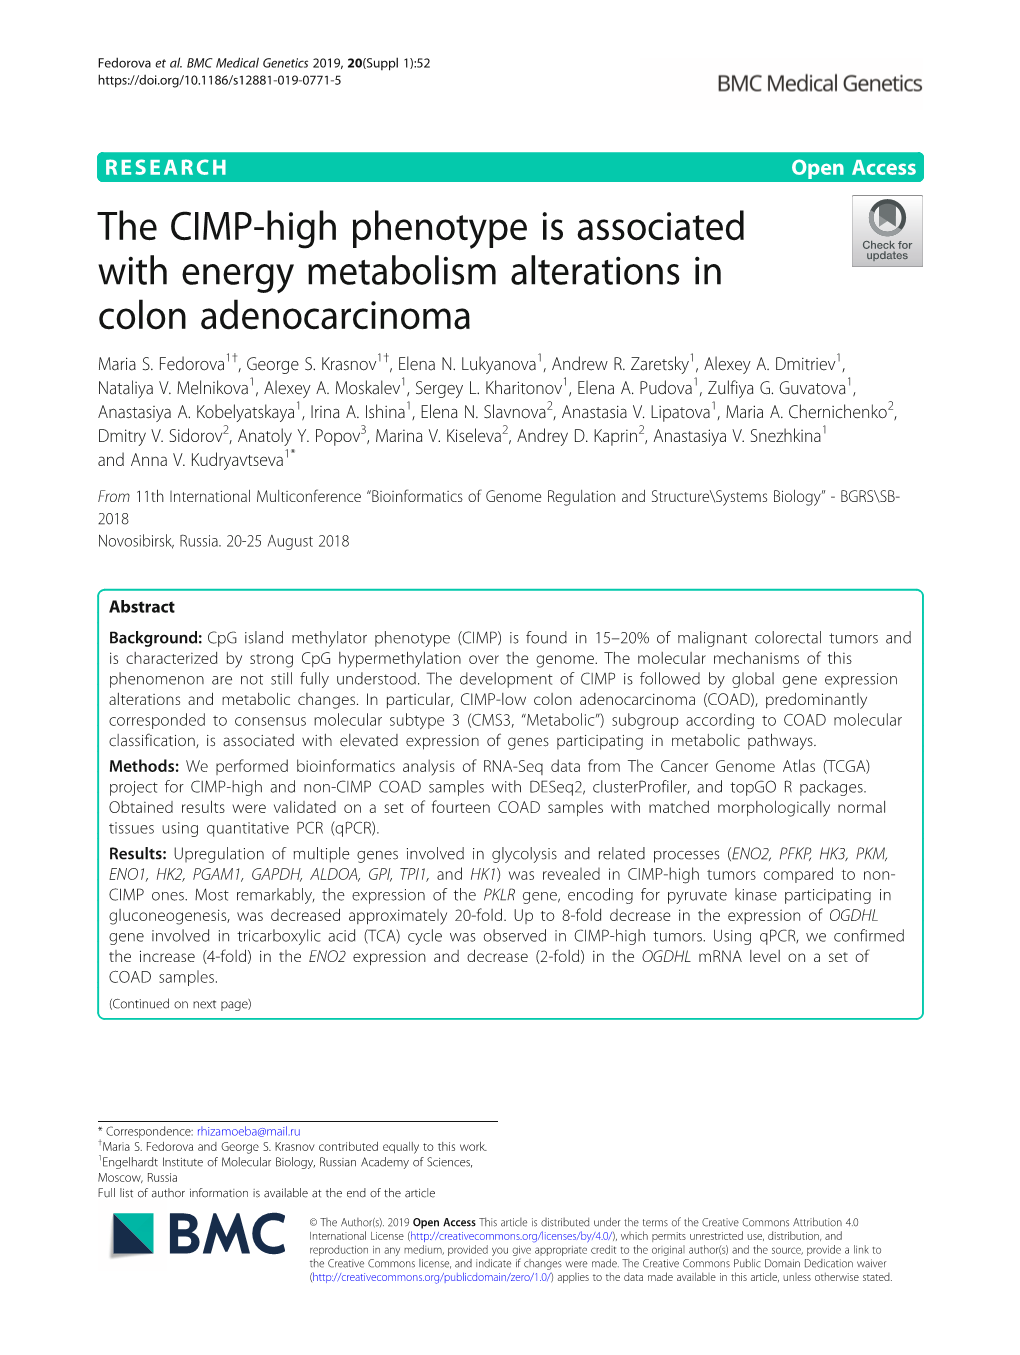 The CIMP-High Phenotype Is Associated with Energy Metabolism Alterations in Colon Adenocarcinoma Maria S